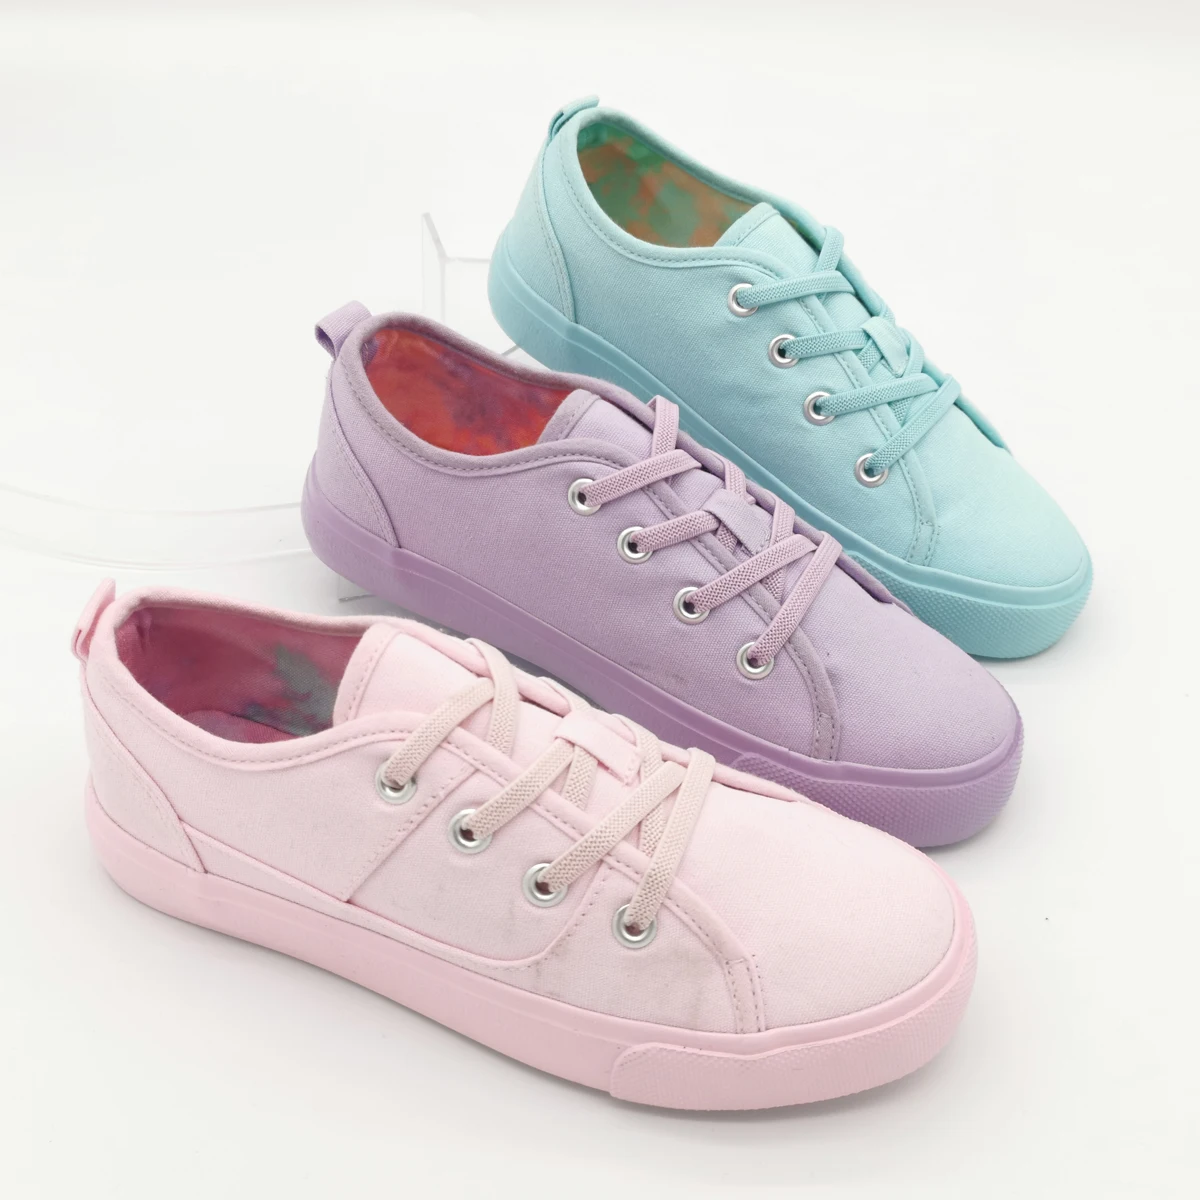 Classical Kids canvas shoes Comfortable children casual shoes Shcool shoes for Girls (1600148680407)